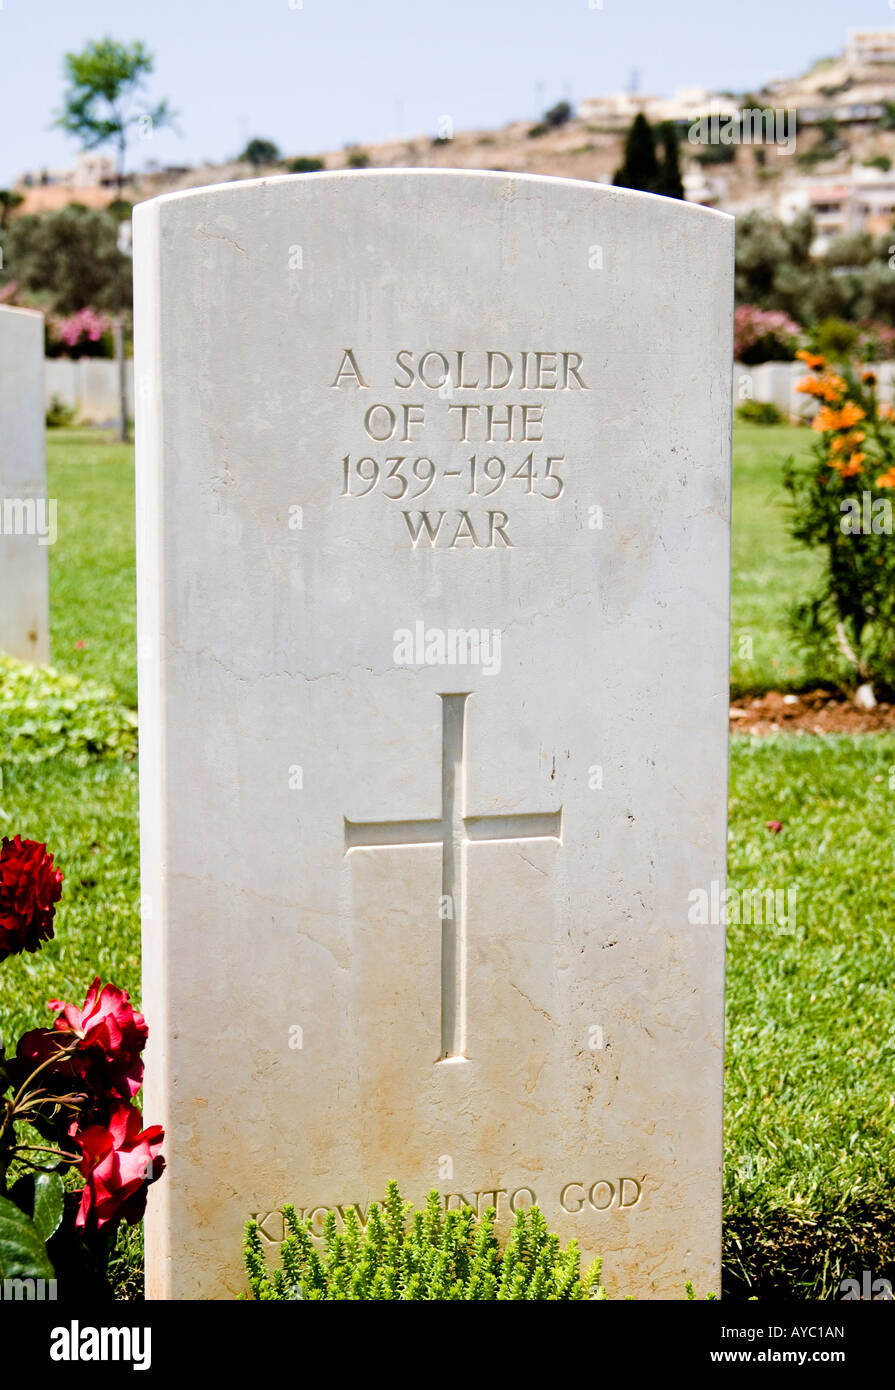 Grave of unknown soldier. Stock Photo